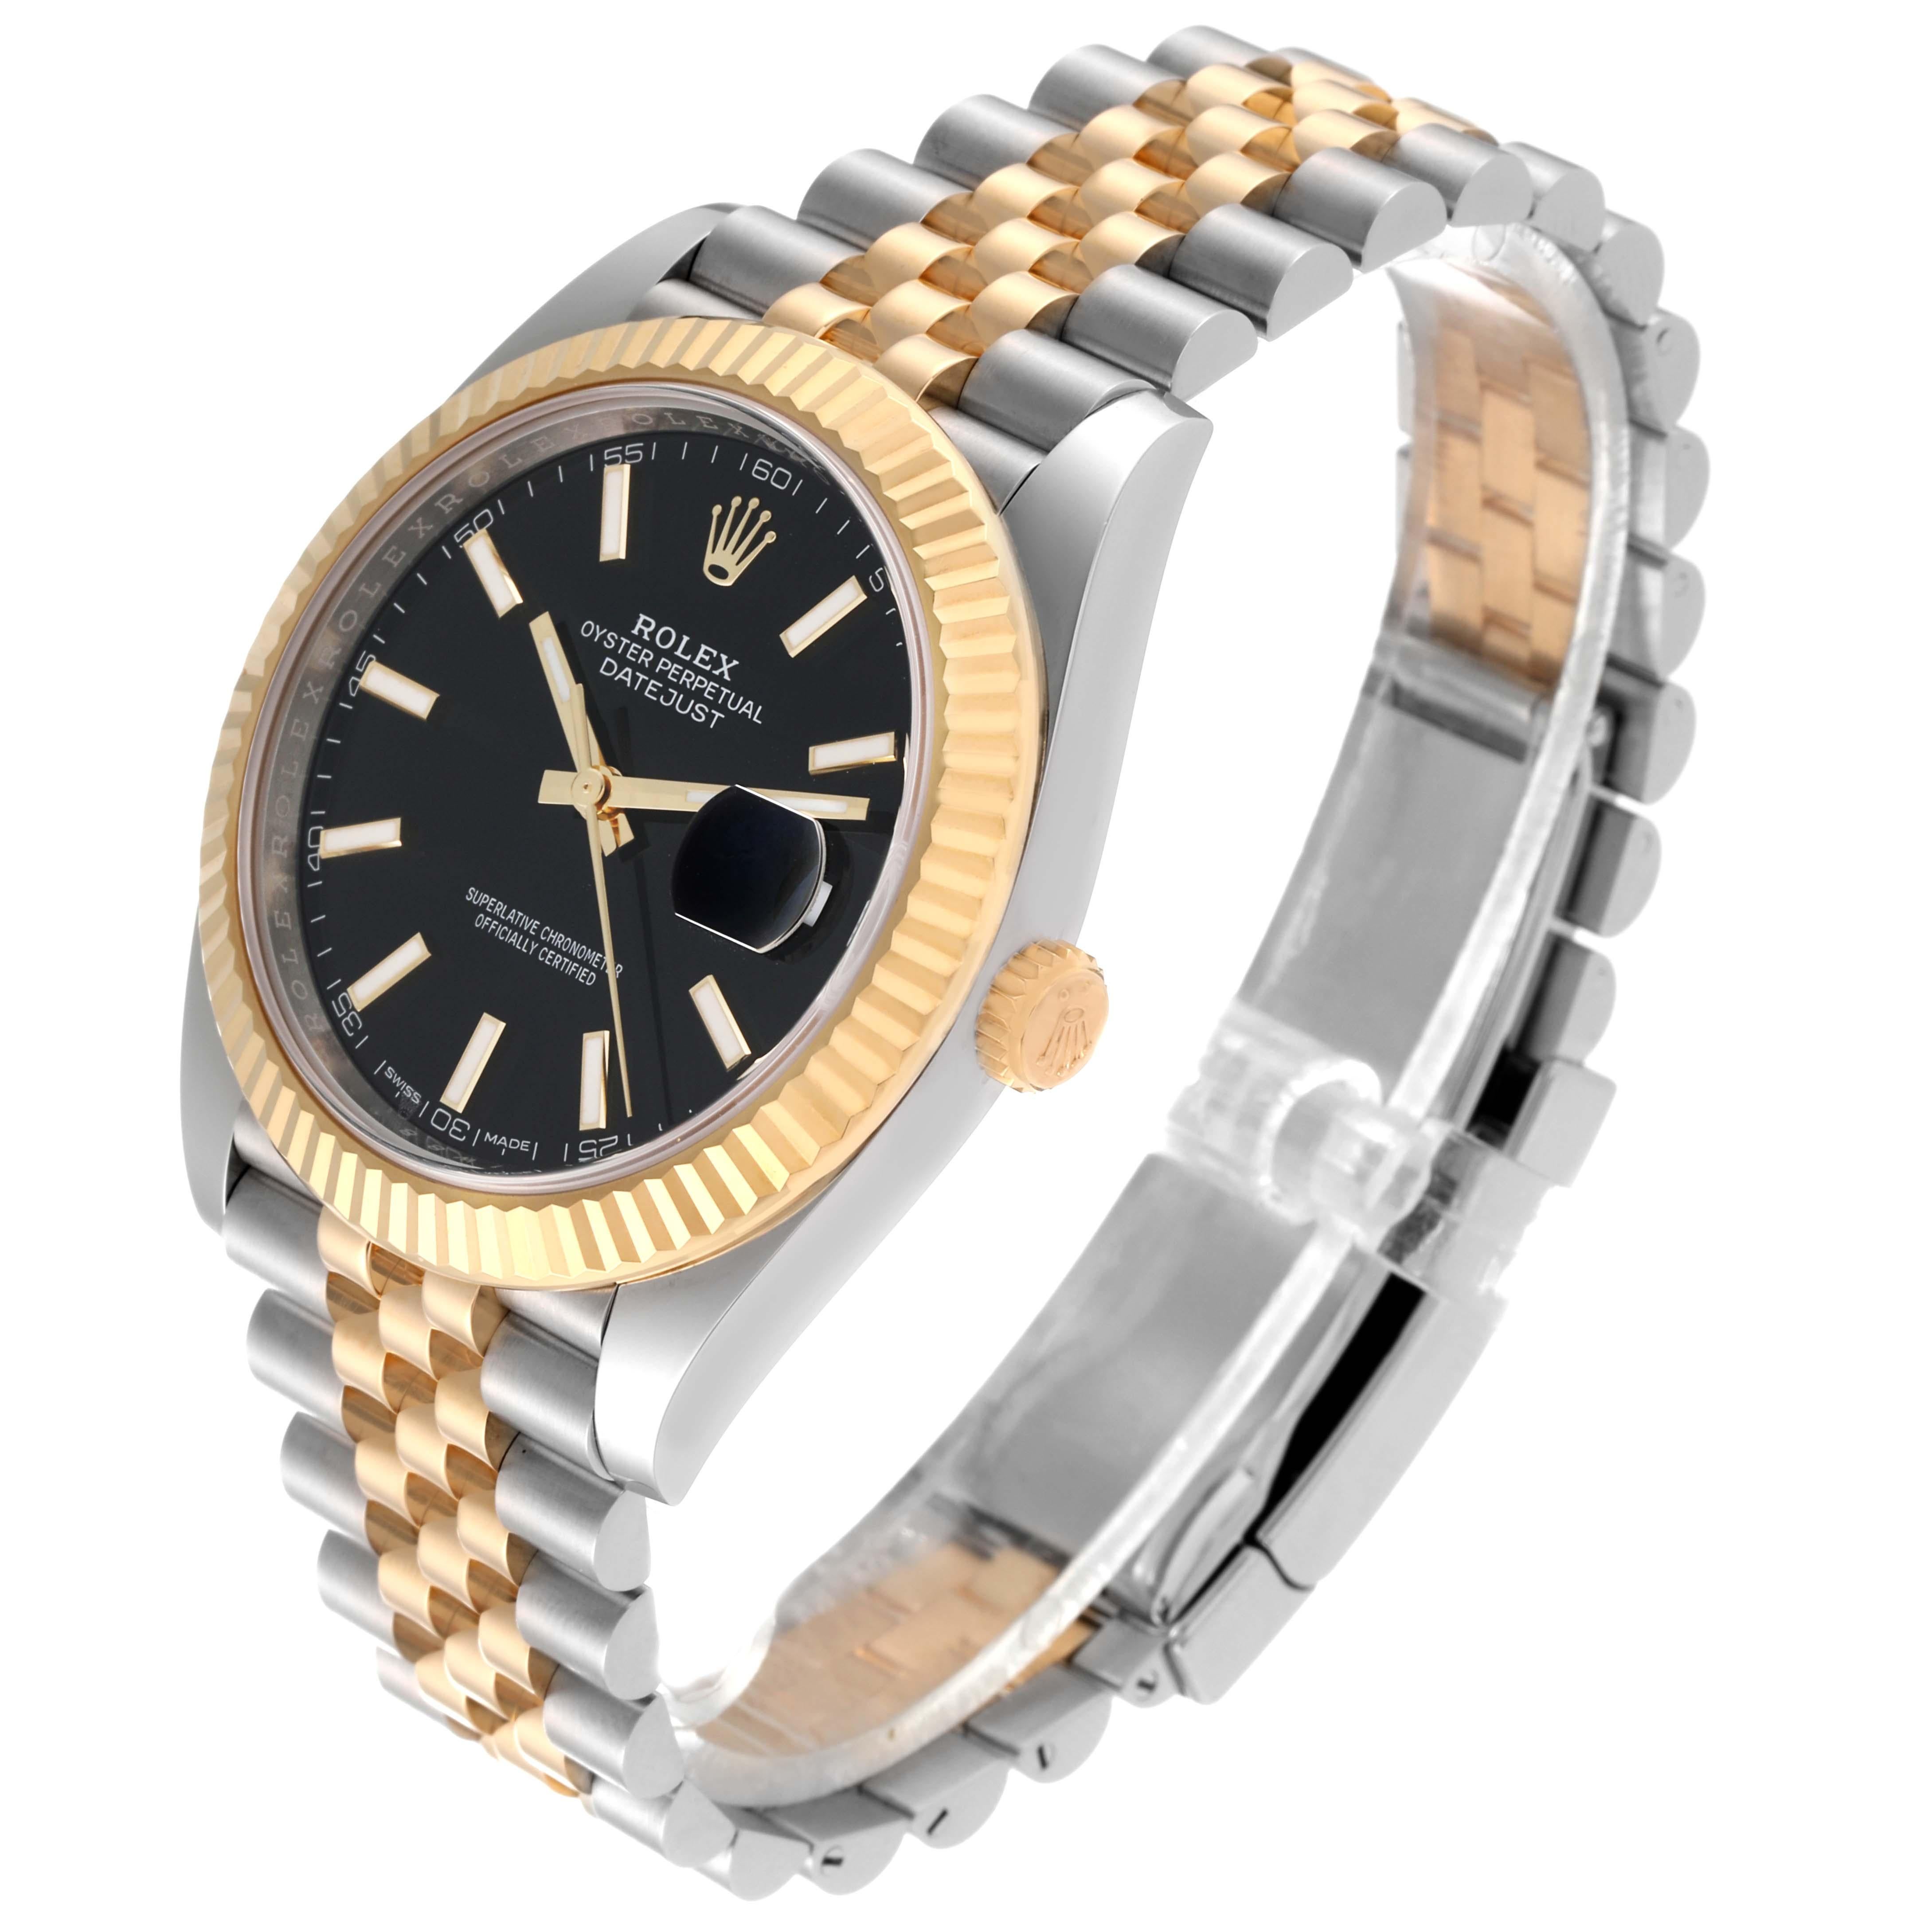 Rolex Datejust 41 Steel Yellow Gold Black Dial Mens Watch 126333 Box Card. Officially certified chronometer automatic self-winding movement with quickset date. Stainless steel and 18K yellow gold case 41 mm in diameter. High polished lugs. Rolex